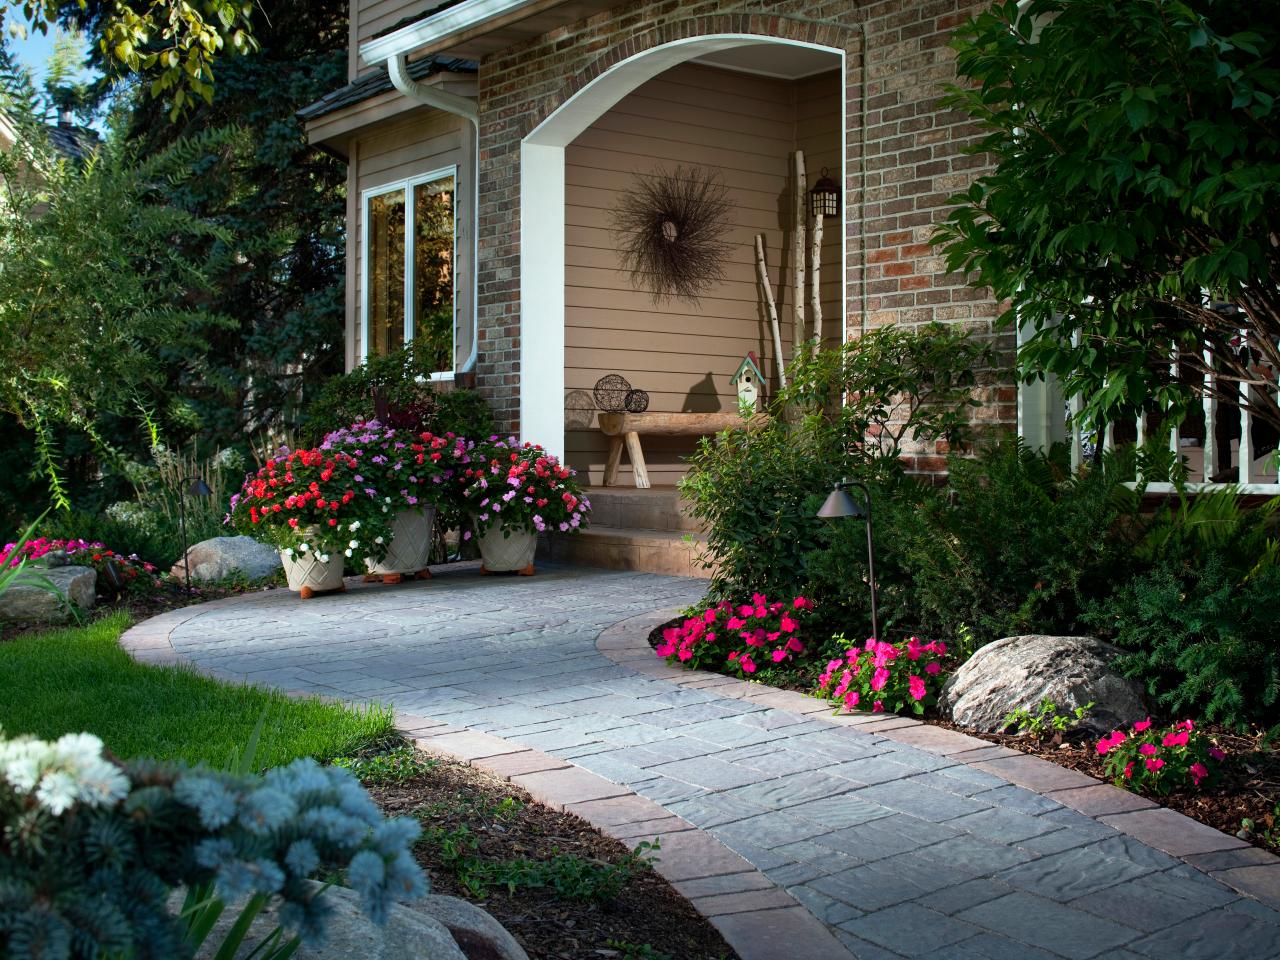 Update-Landscaping A List of Ways to Keep Your Home Feeling Happy and Healthy This Year